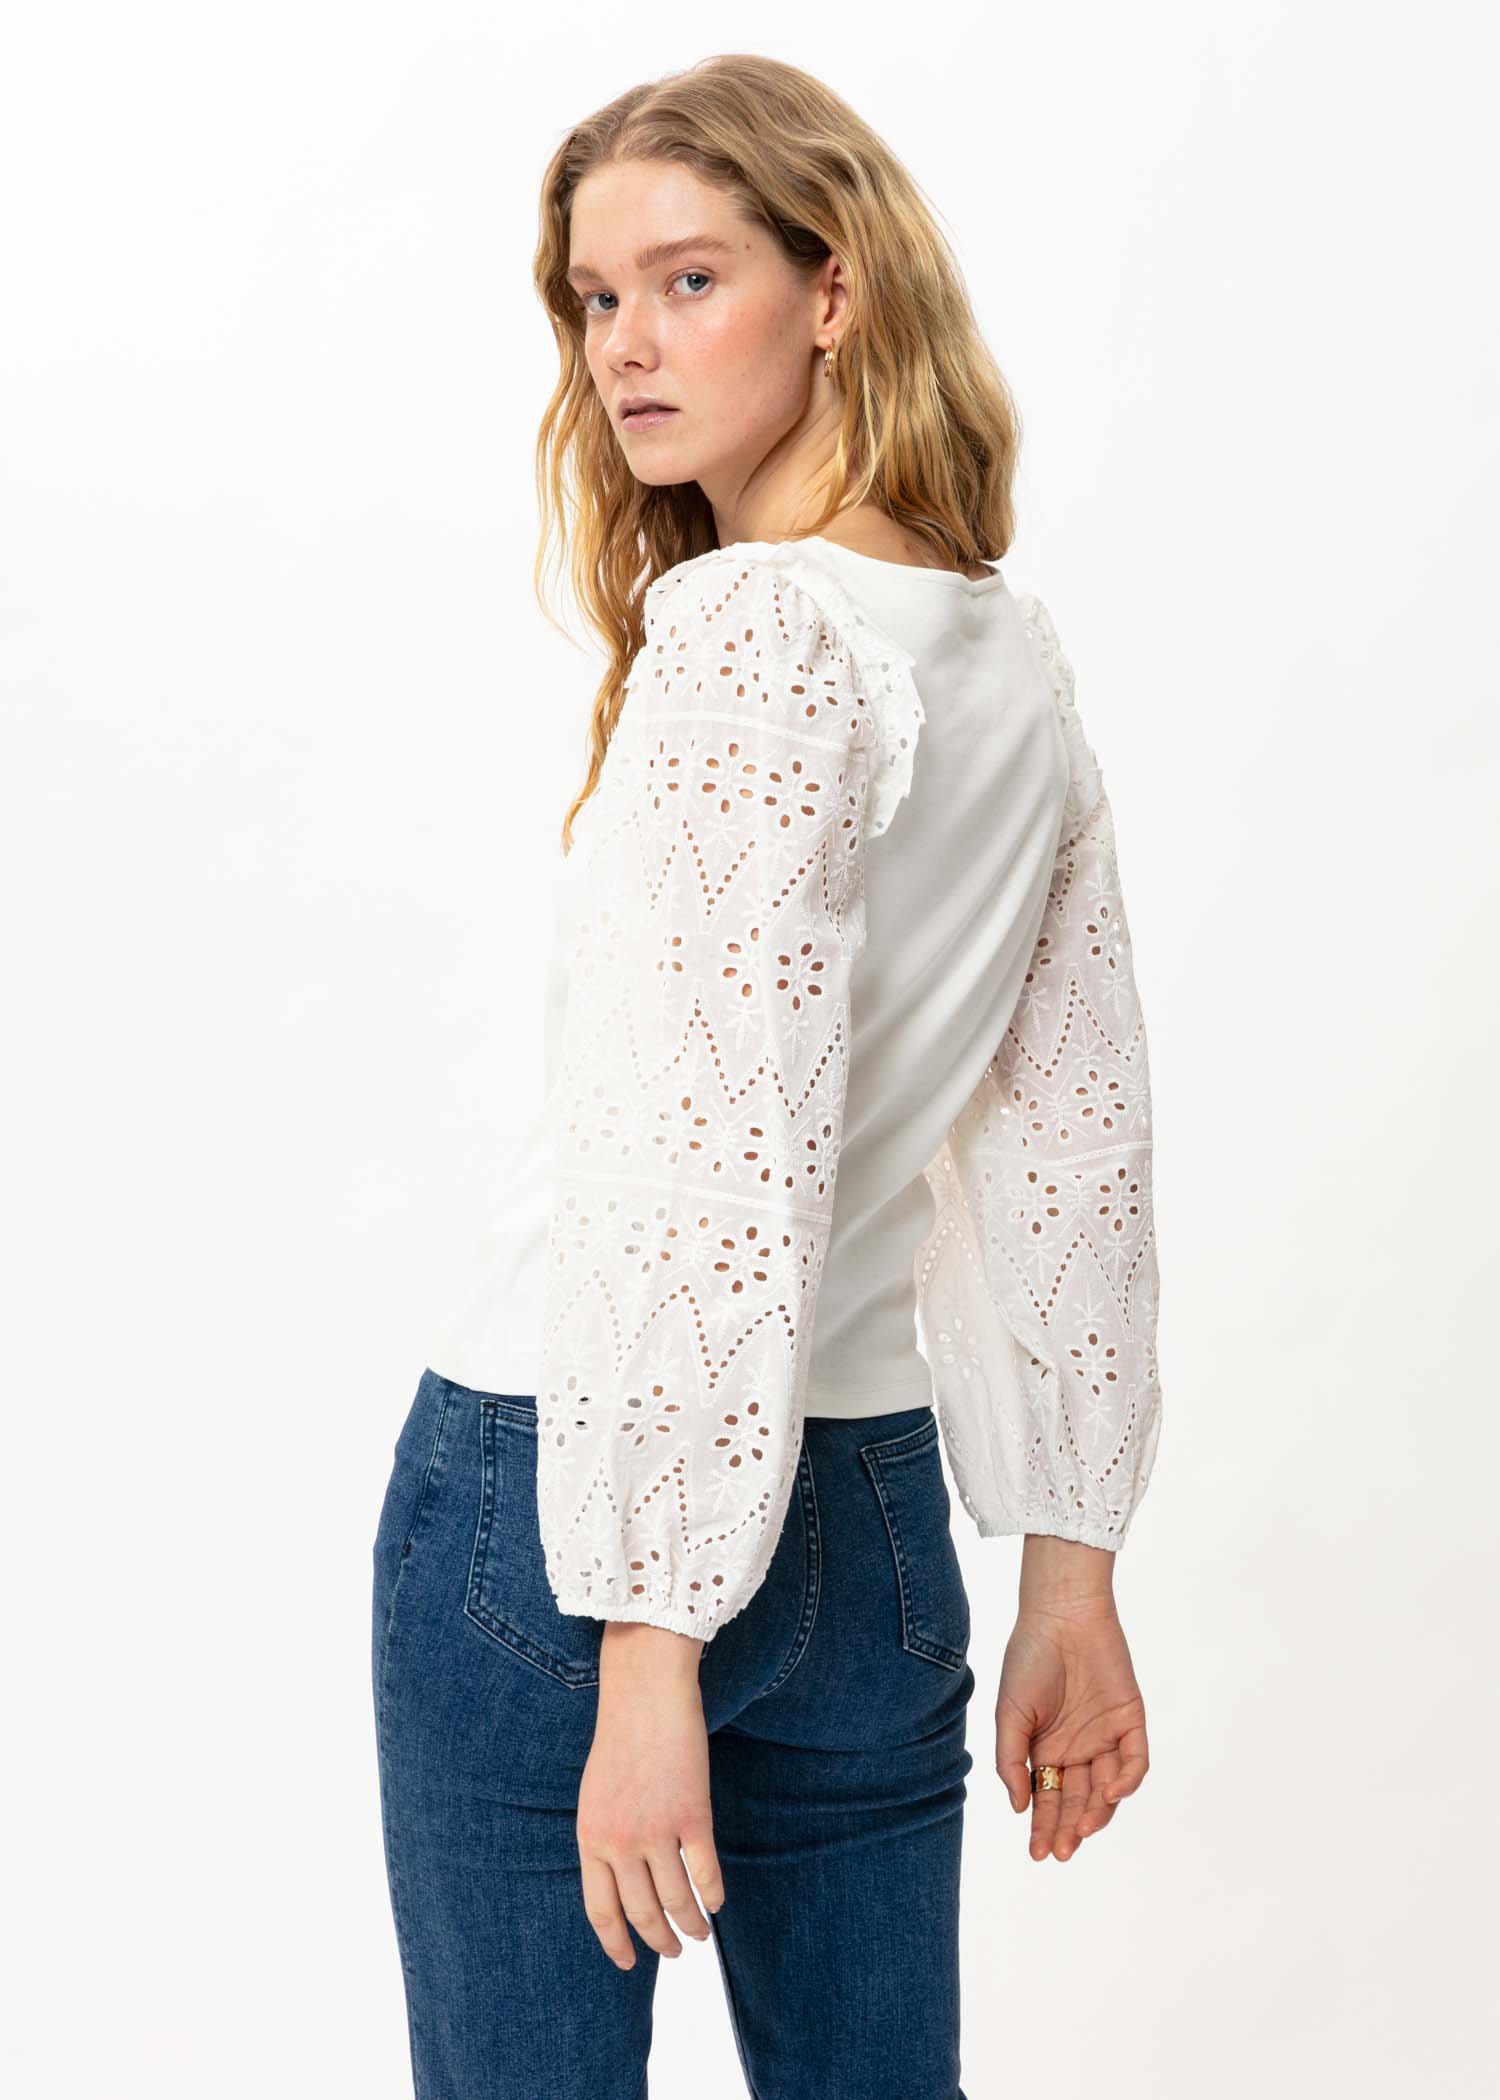 Broderie anglaise top Image 2